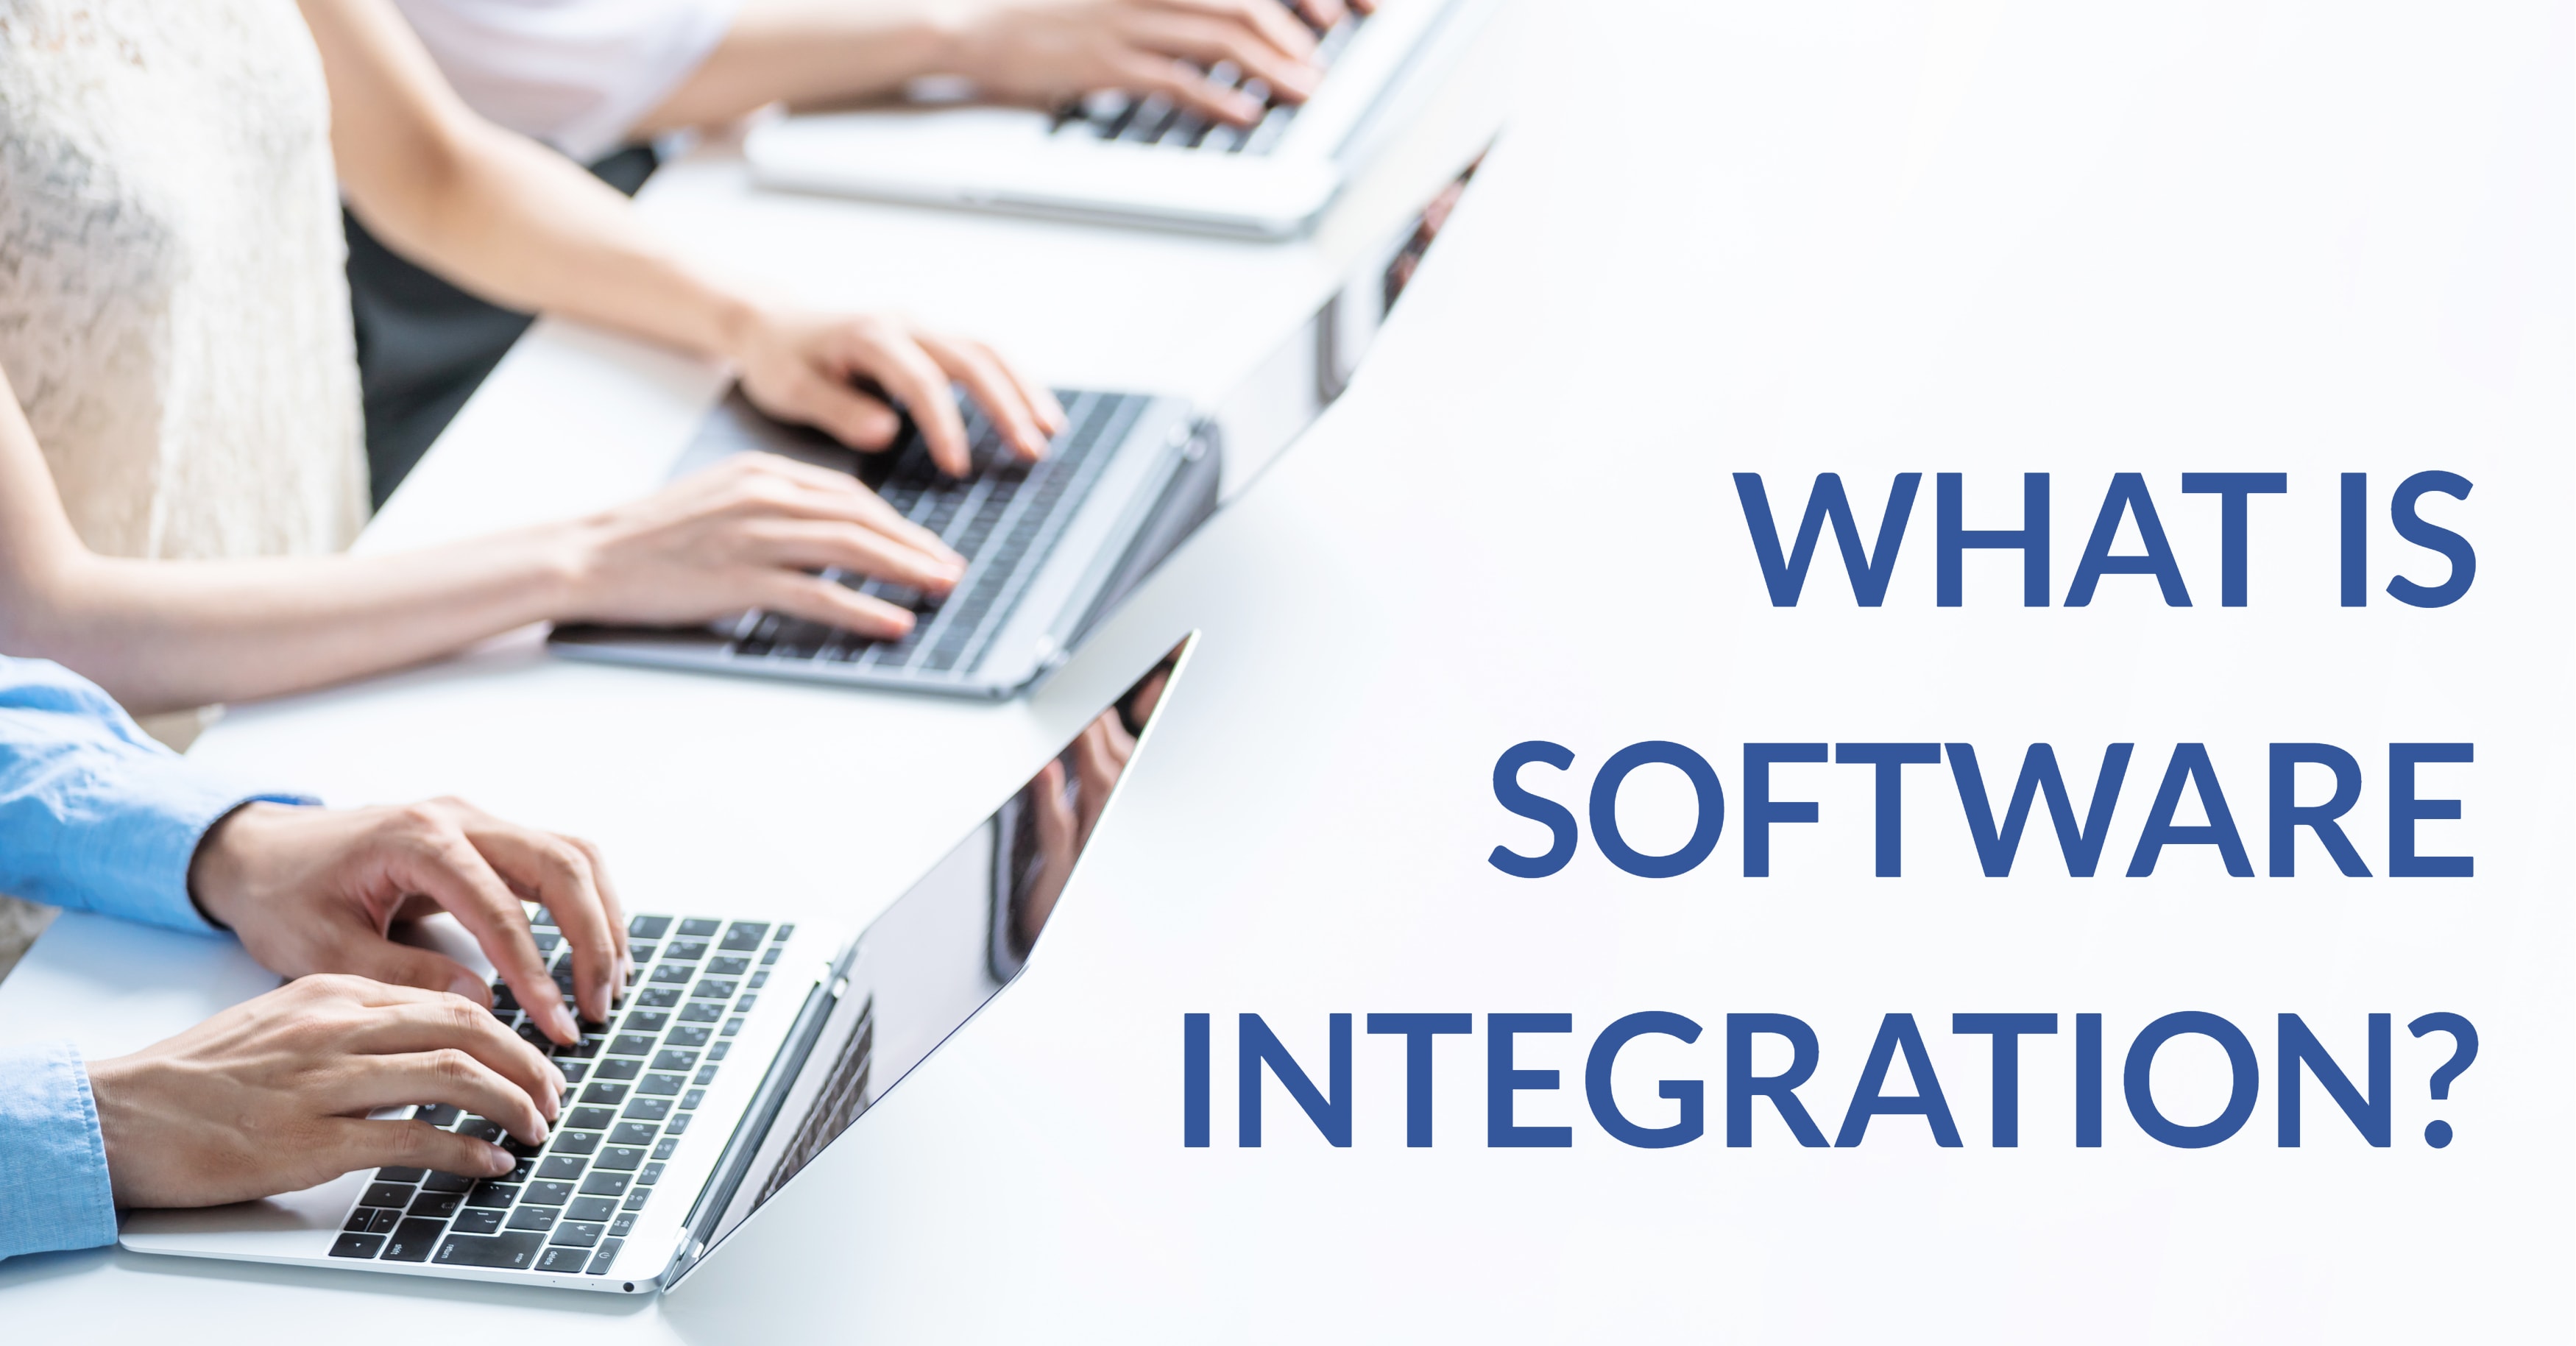 What is Software Integration